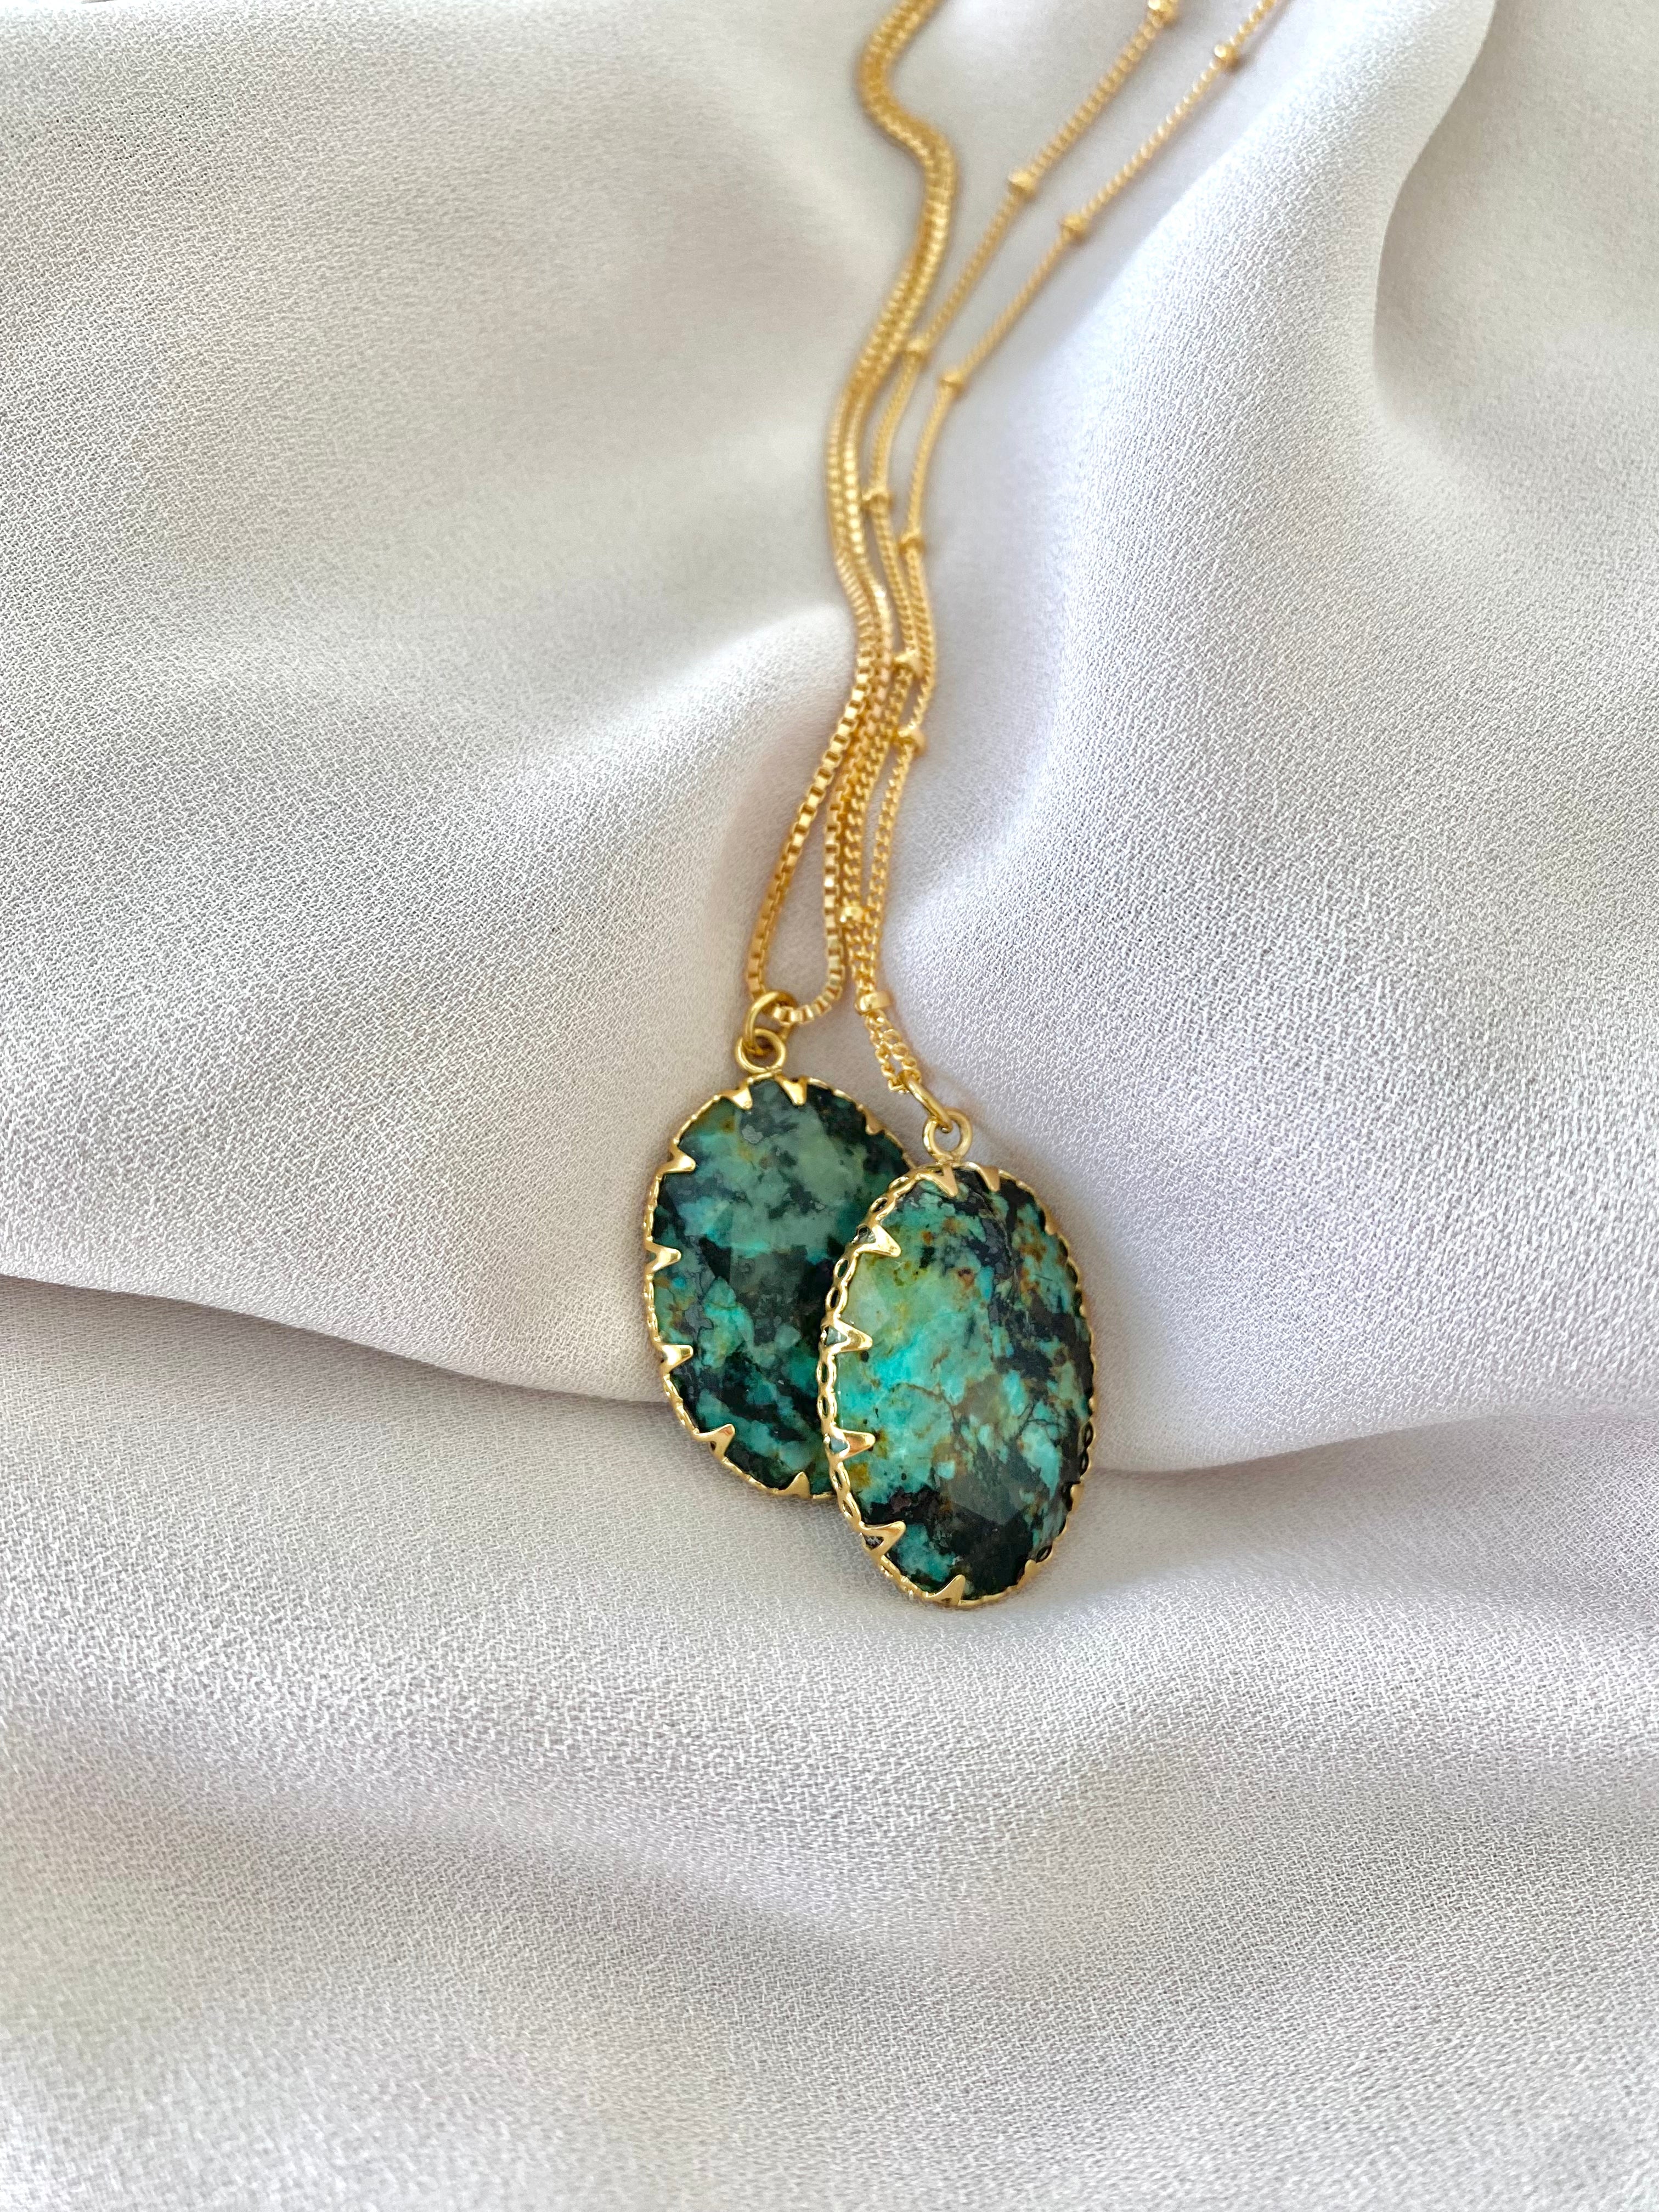 African Turquoise Gemstone Pendant Necklace - Pronged Setting - Gold Filled Chain